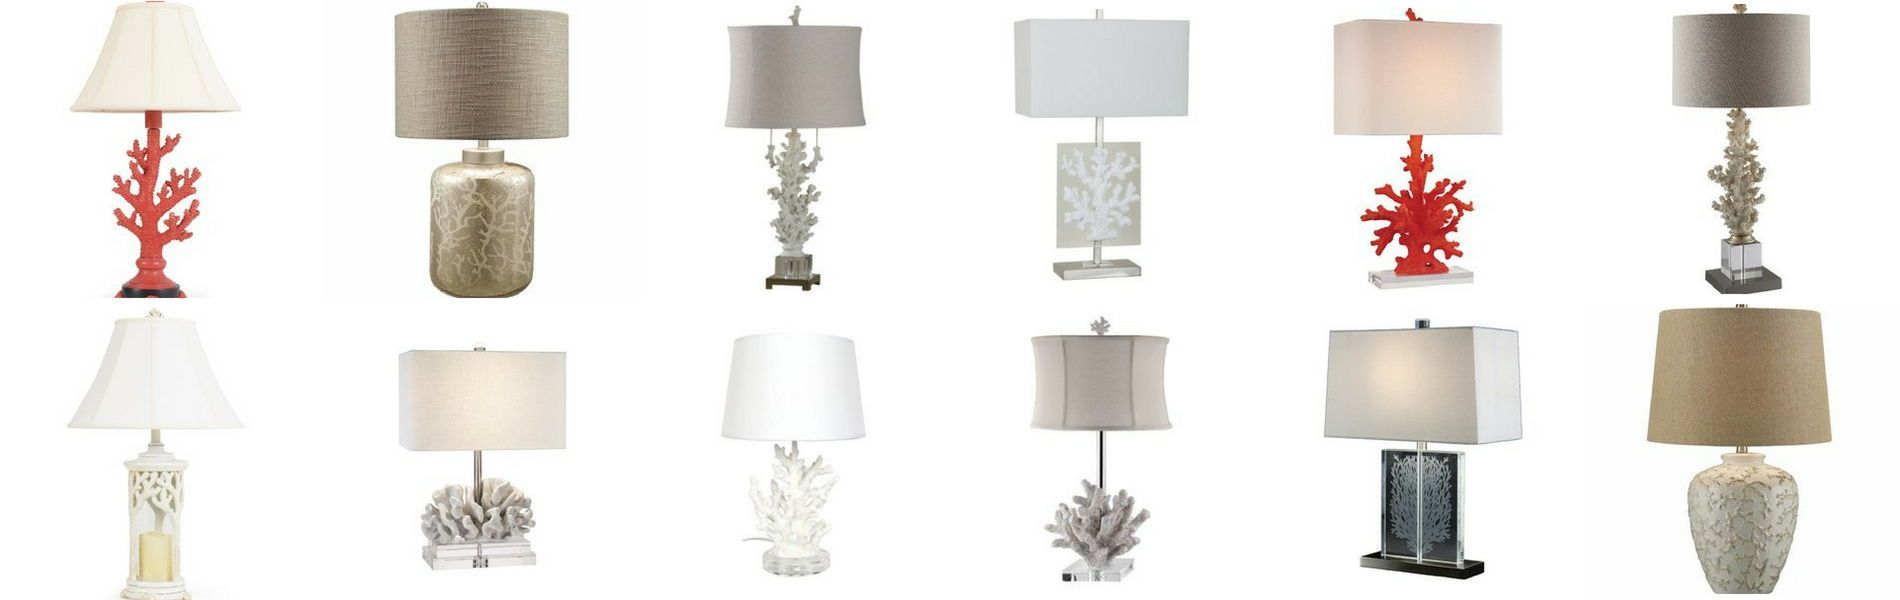 Coral Lamps Discover The Best Coral Themed Table Lamps And intended for measurements 1900 X 600